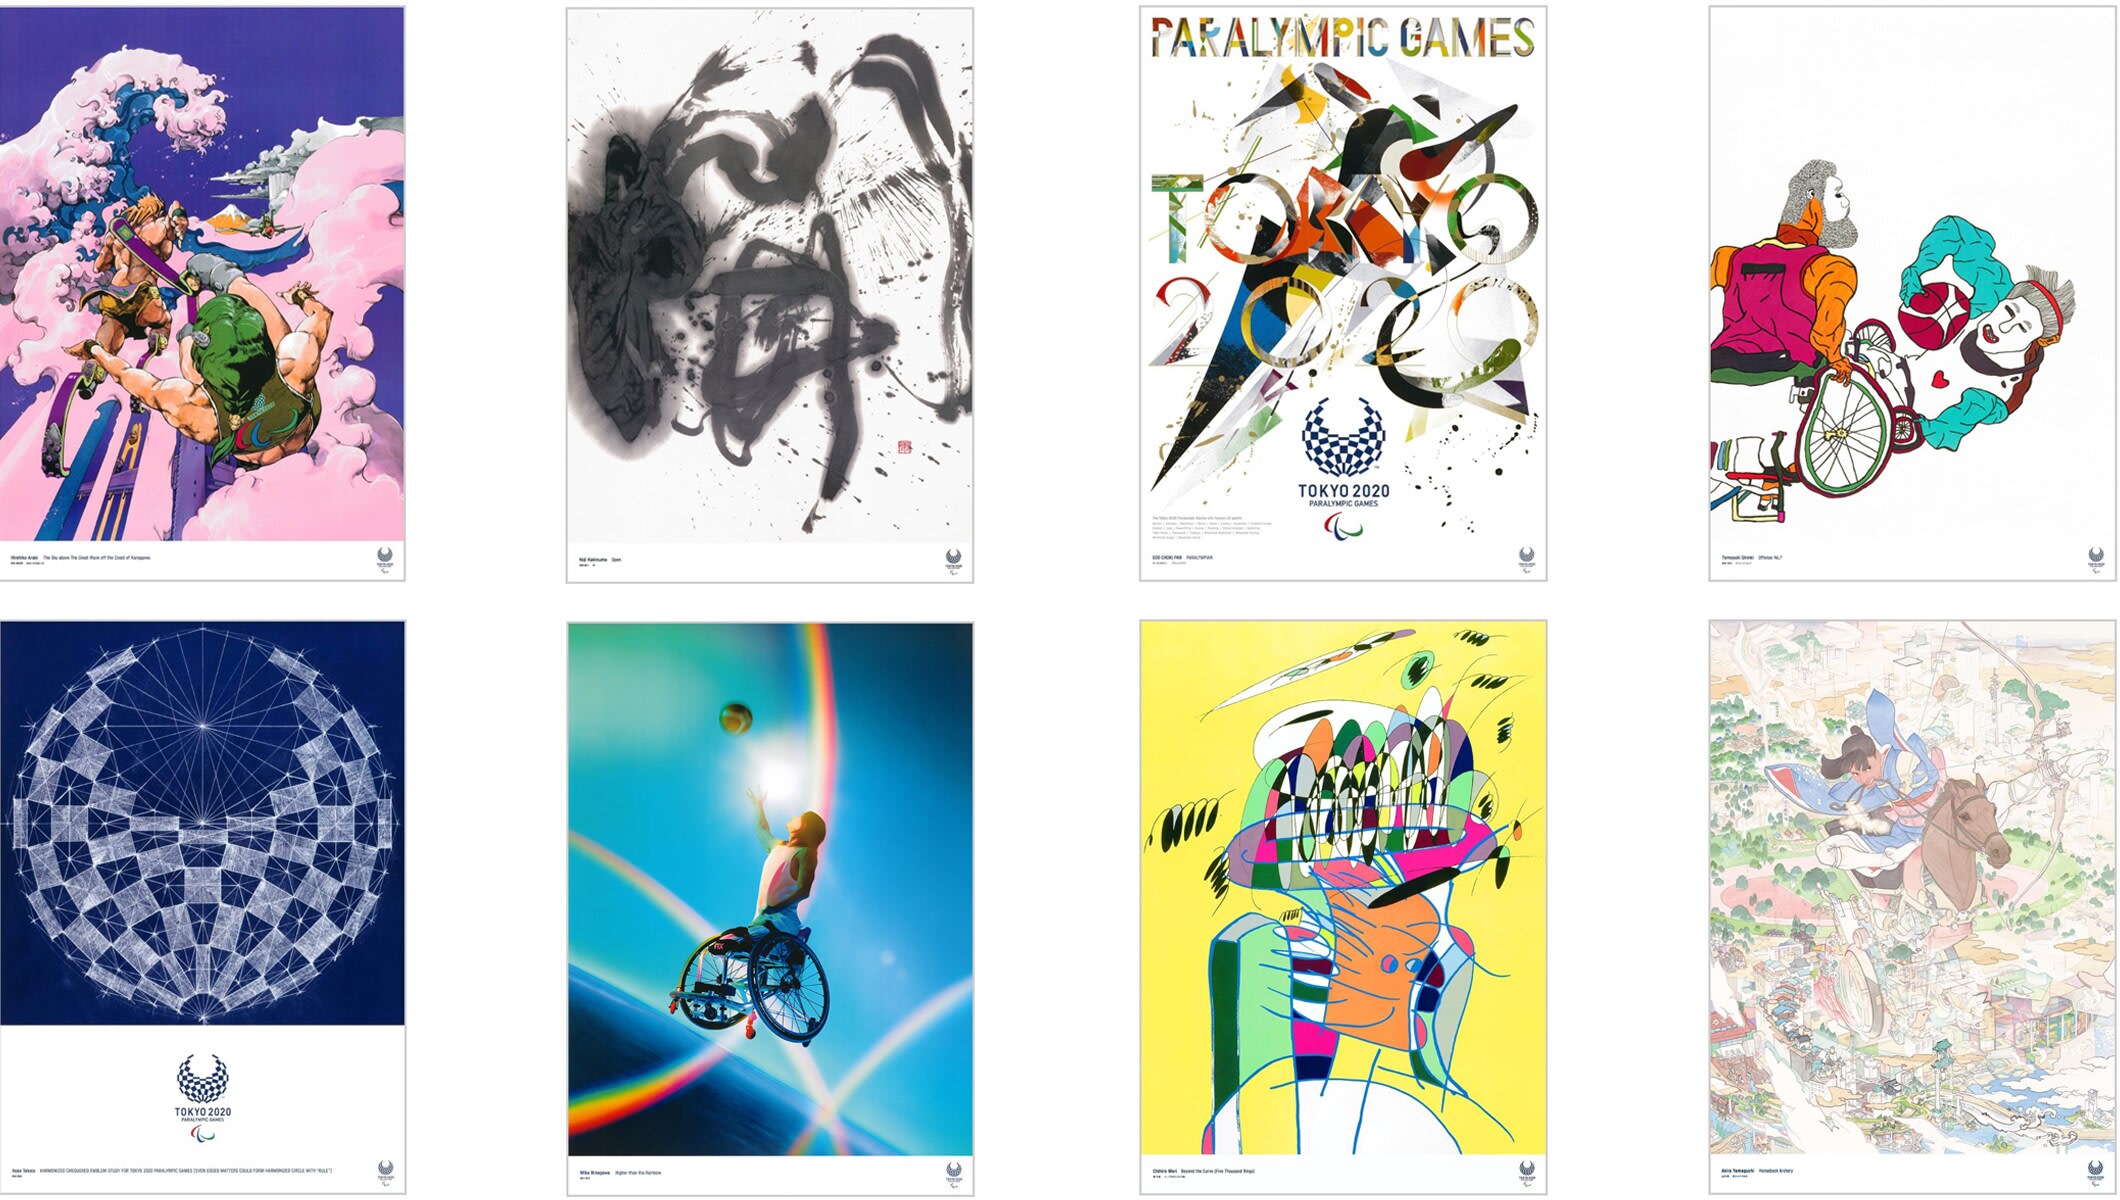 Tokyo 2020 unveils official art posters to celebrate the Games